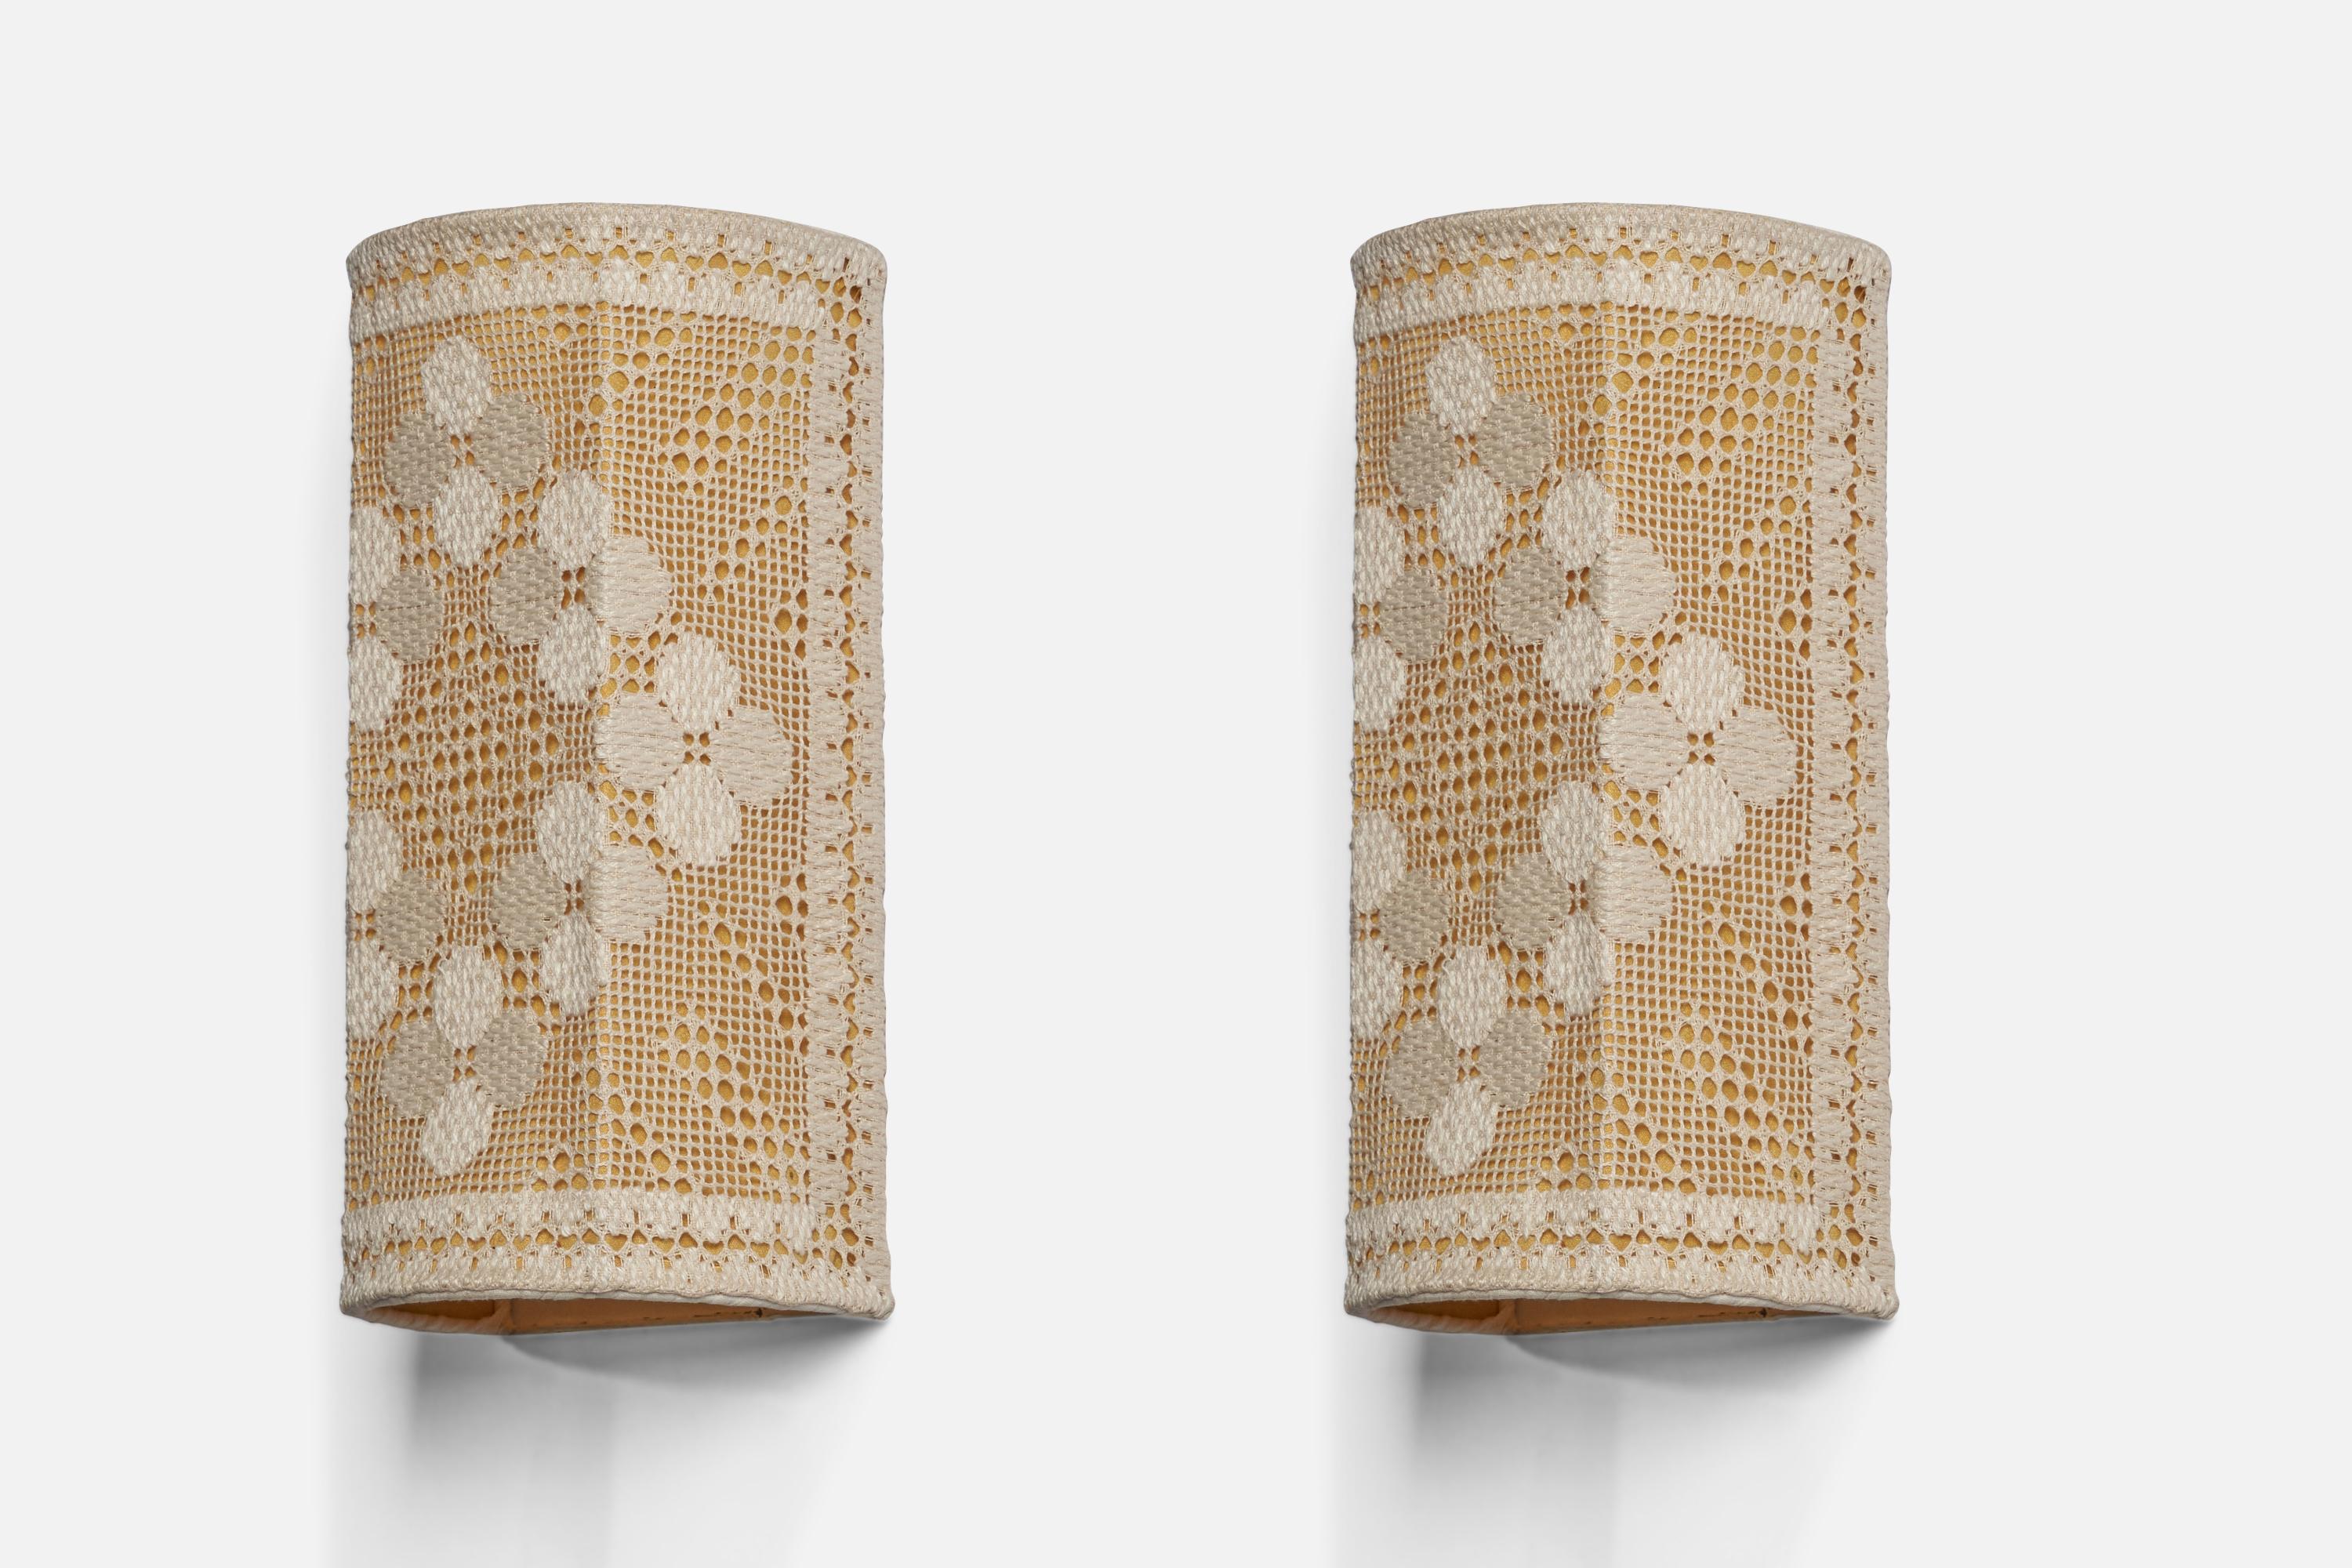 A pair of embroidery fabric wall lights designed and produced in Sweden, 1940s.

Overall Dimensions (inches): 11.5” H x 5.75” W x 3.6” D
Bulb Specifications: E-14
Number of Sockets: 1